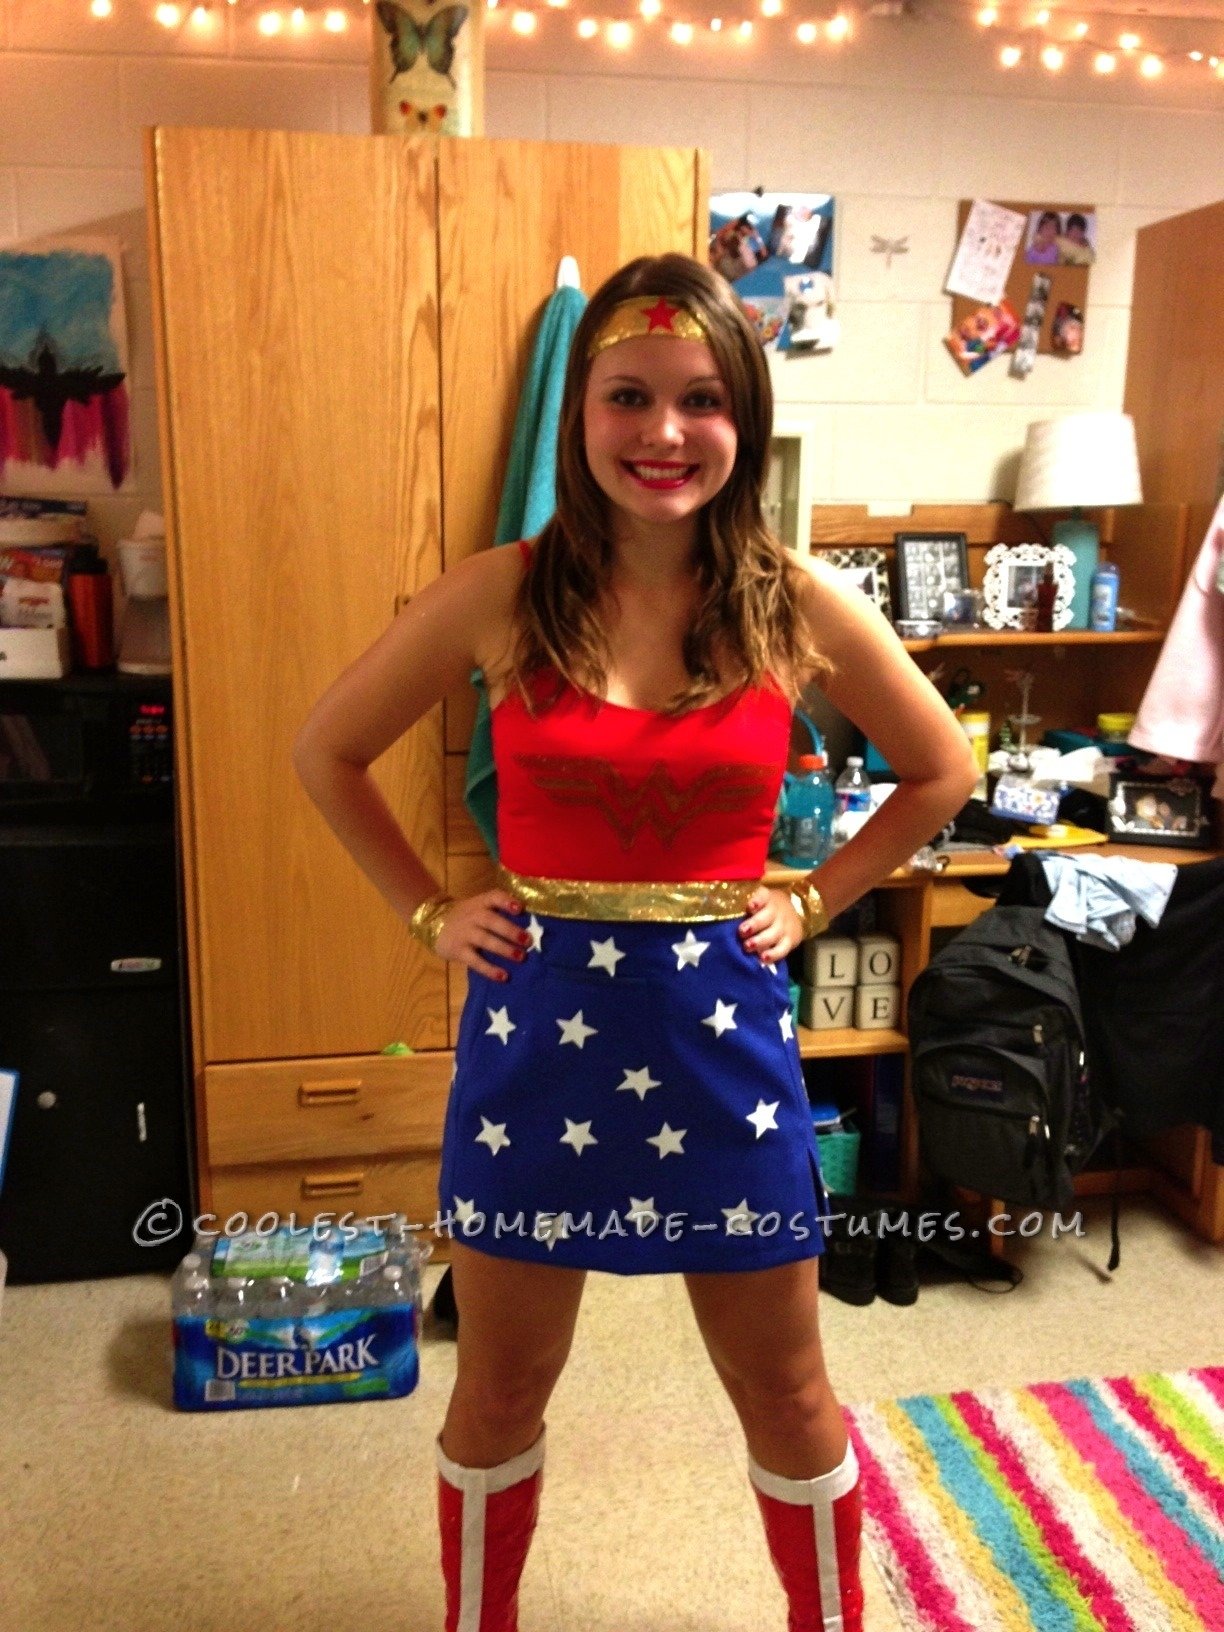 10 Lovable Homemade Costume Ideas For Girls 50 fiercely fabulous homemade wonder woman costumes 1 2024